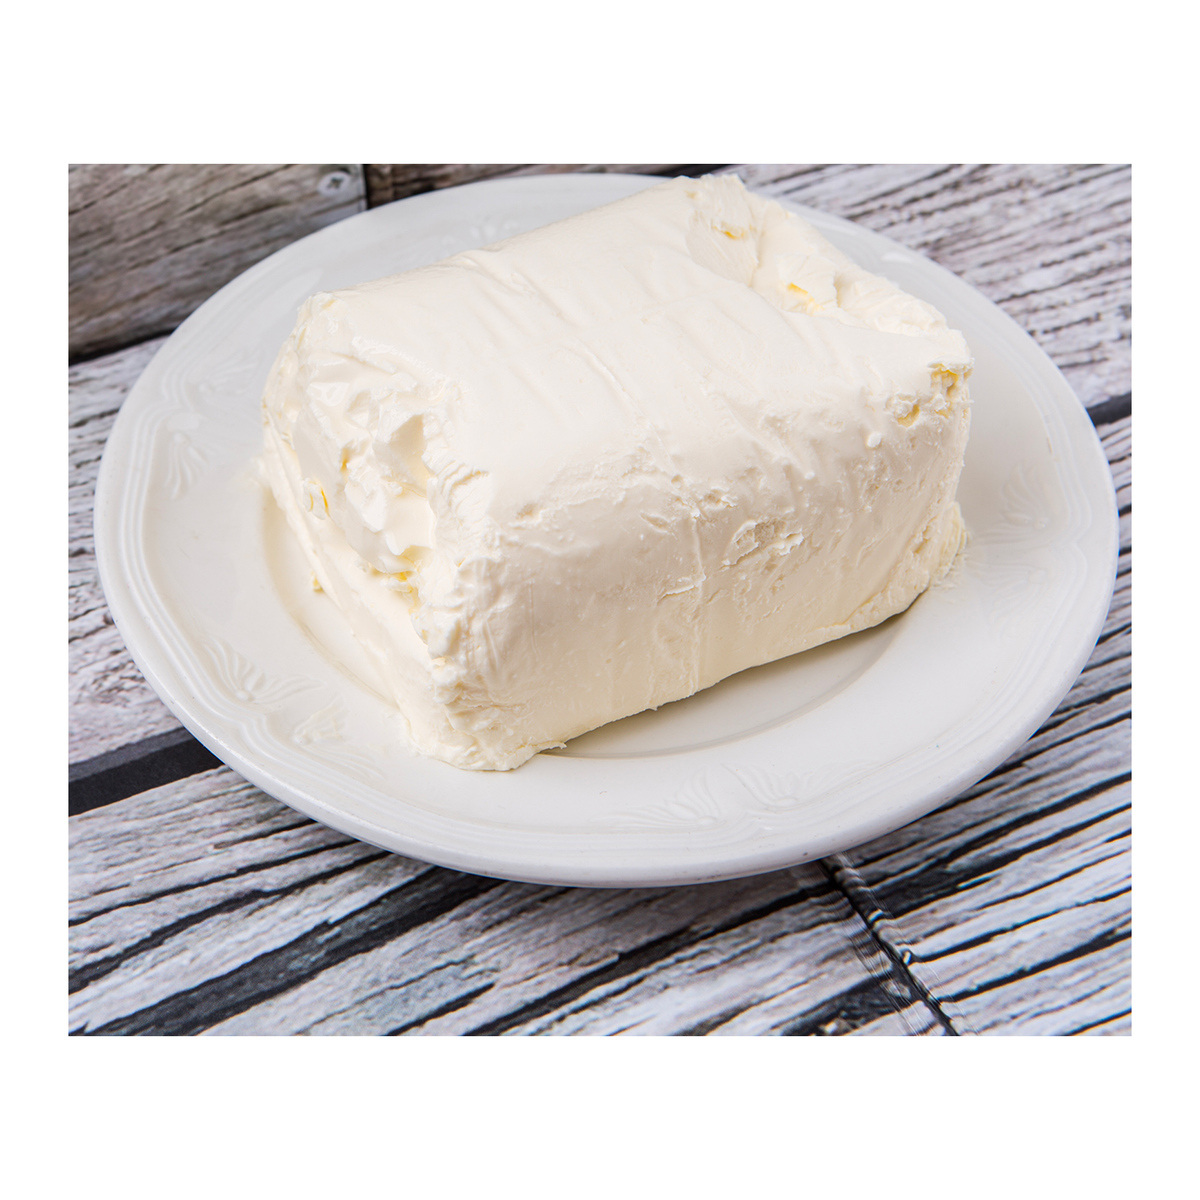 Cyprus Istanbuly Cow Cheese 250g Approx. Weight